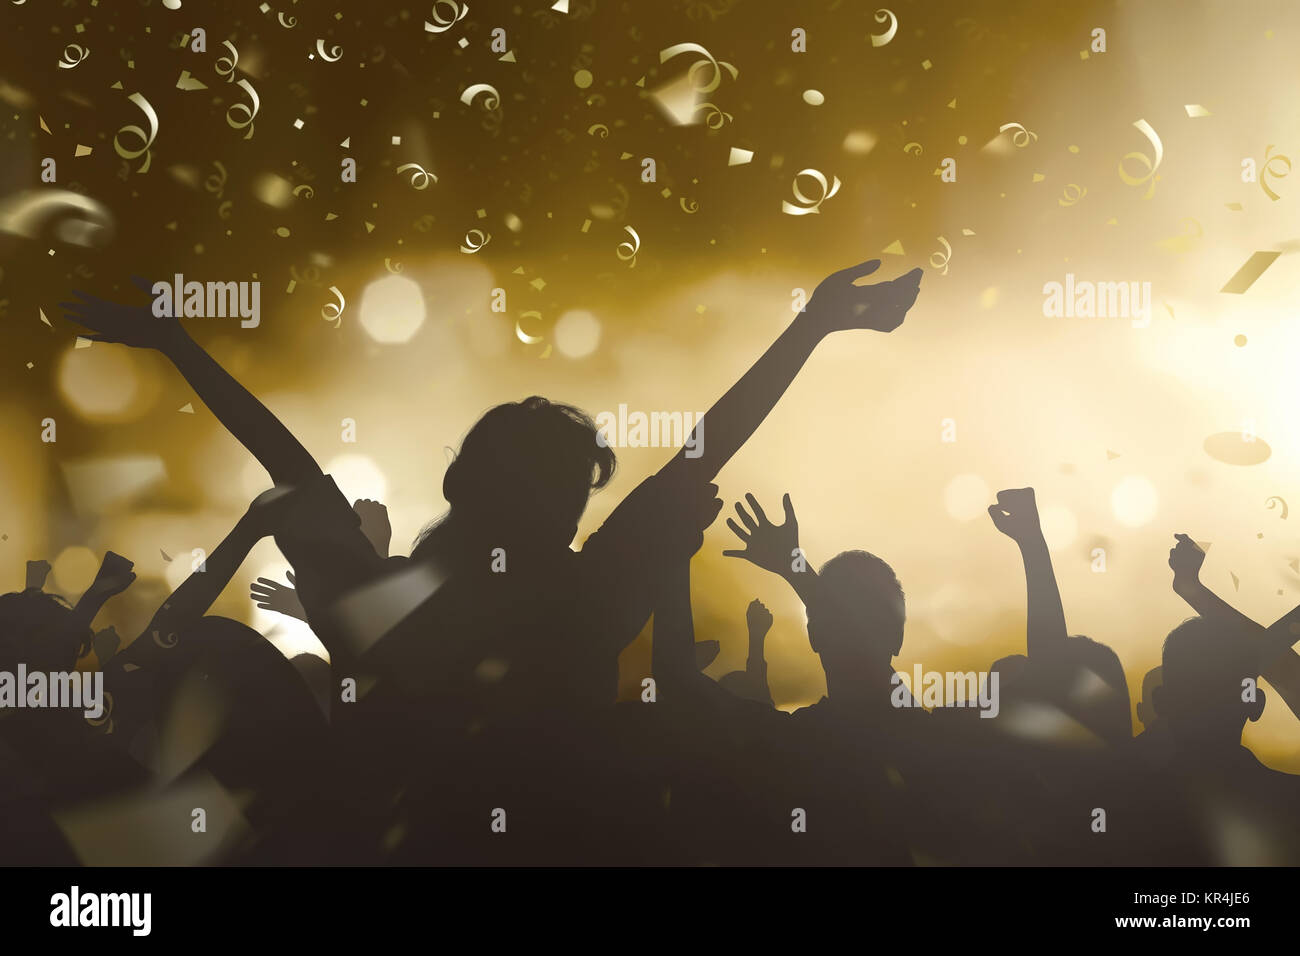 Silhouette crowd of people enjoying New Year celebration. Happy New Year 2018 Stock Photo